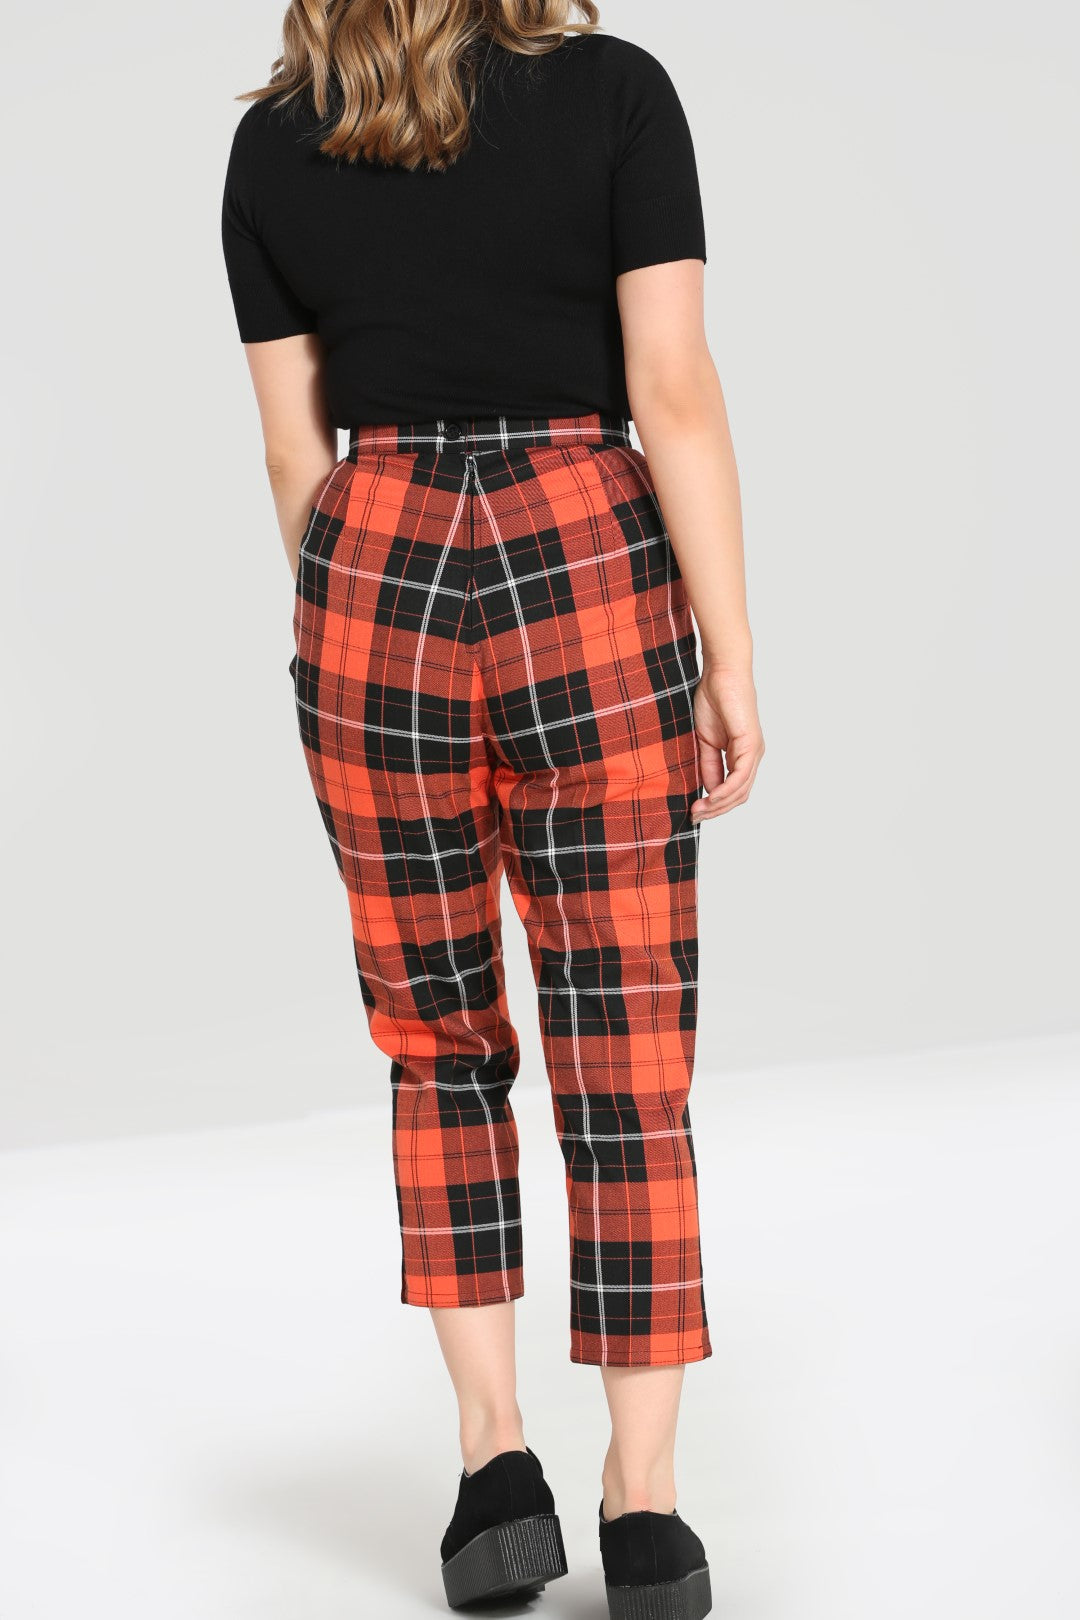 Clementine Trousers